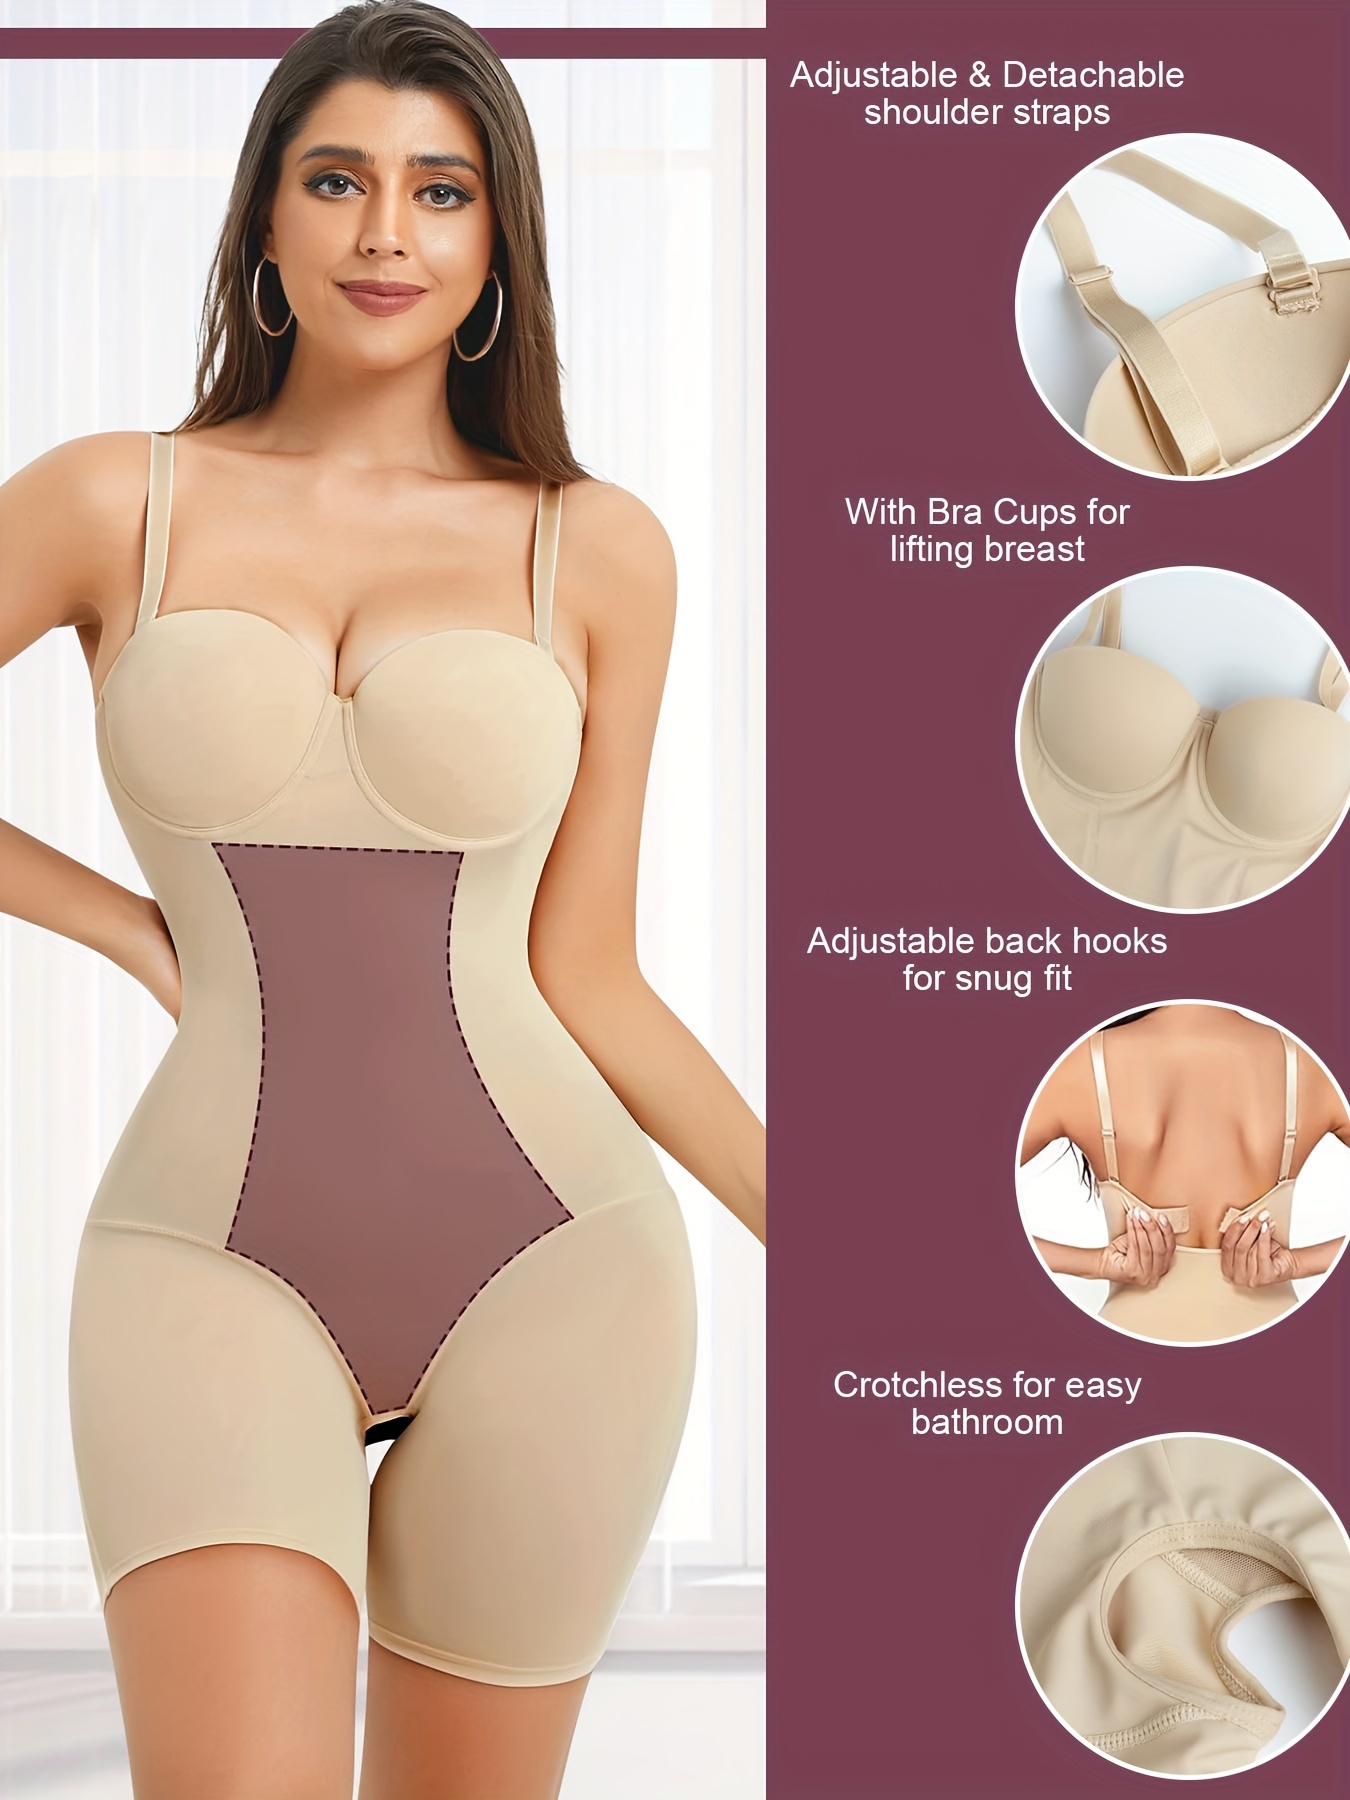 Shaping garments can control the tummy and lift the buttocks, and are